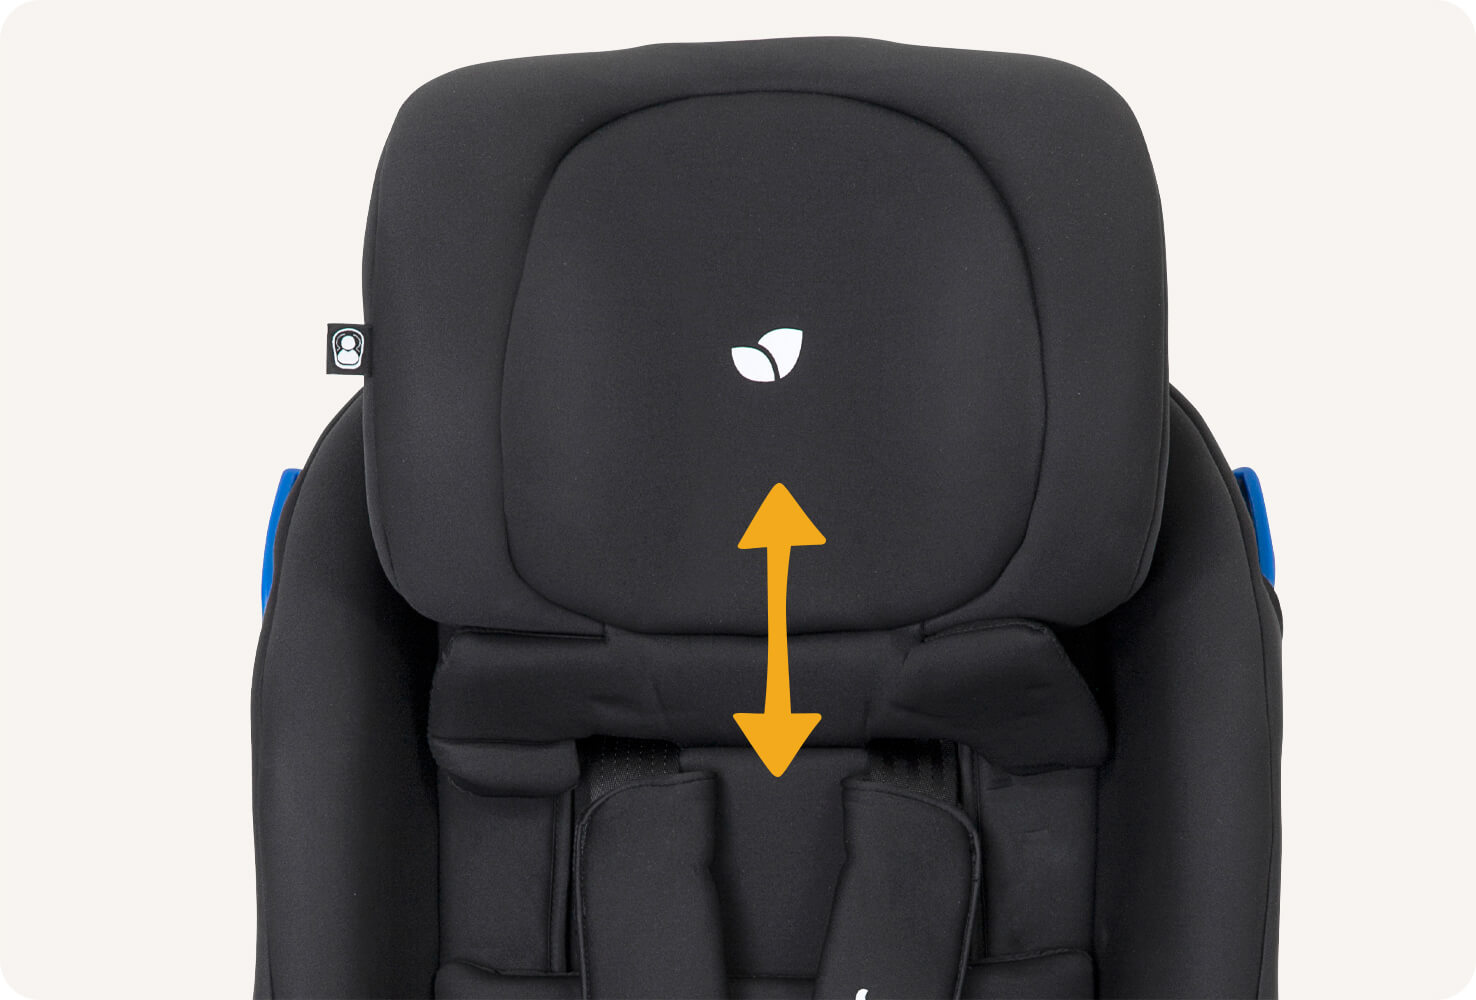 Joie Steadi car seat with harness clipped in and head rest set at highest position with yellow arrow pointing up and down on headrest that has a black colour, and facing forward.